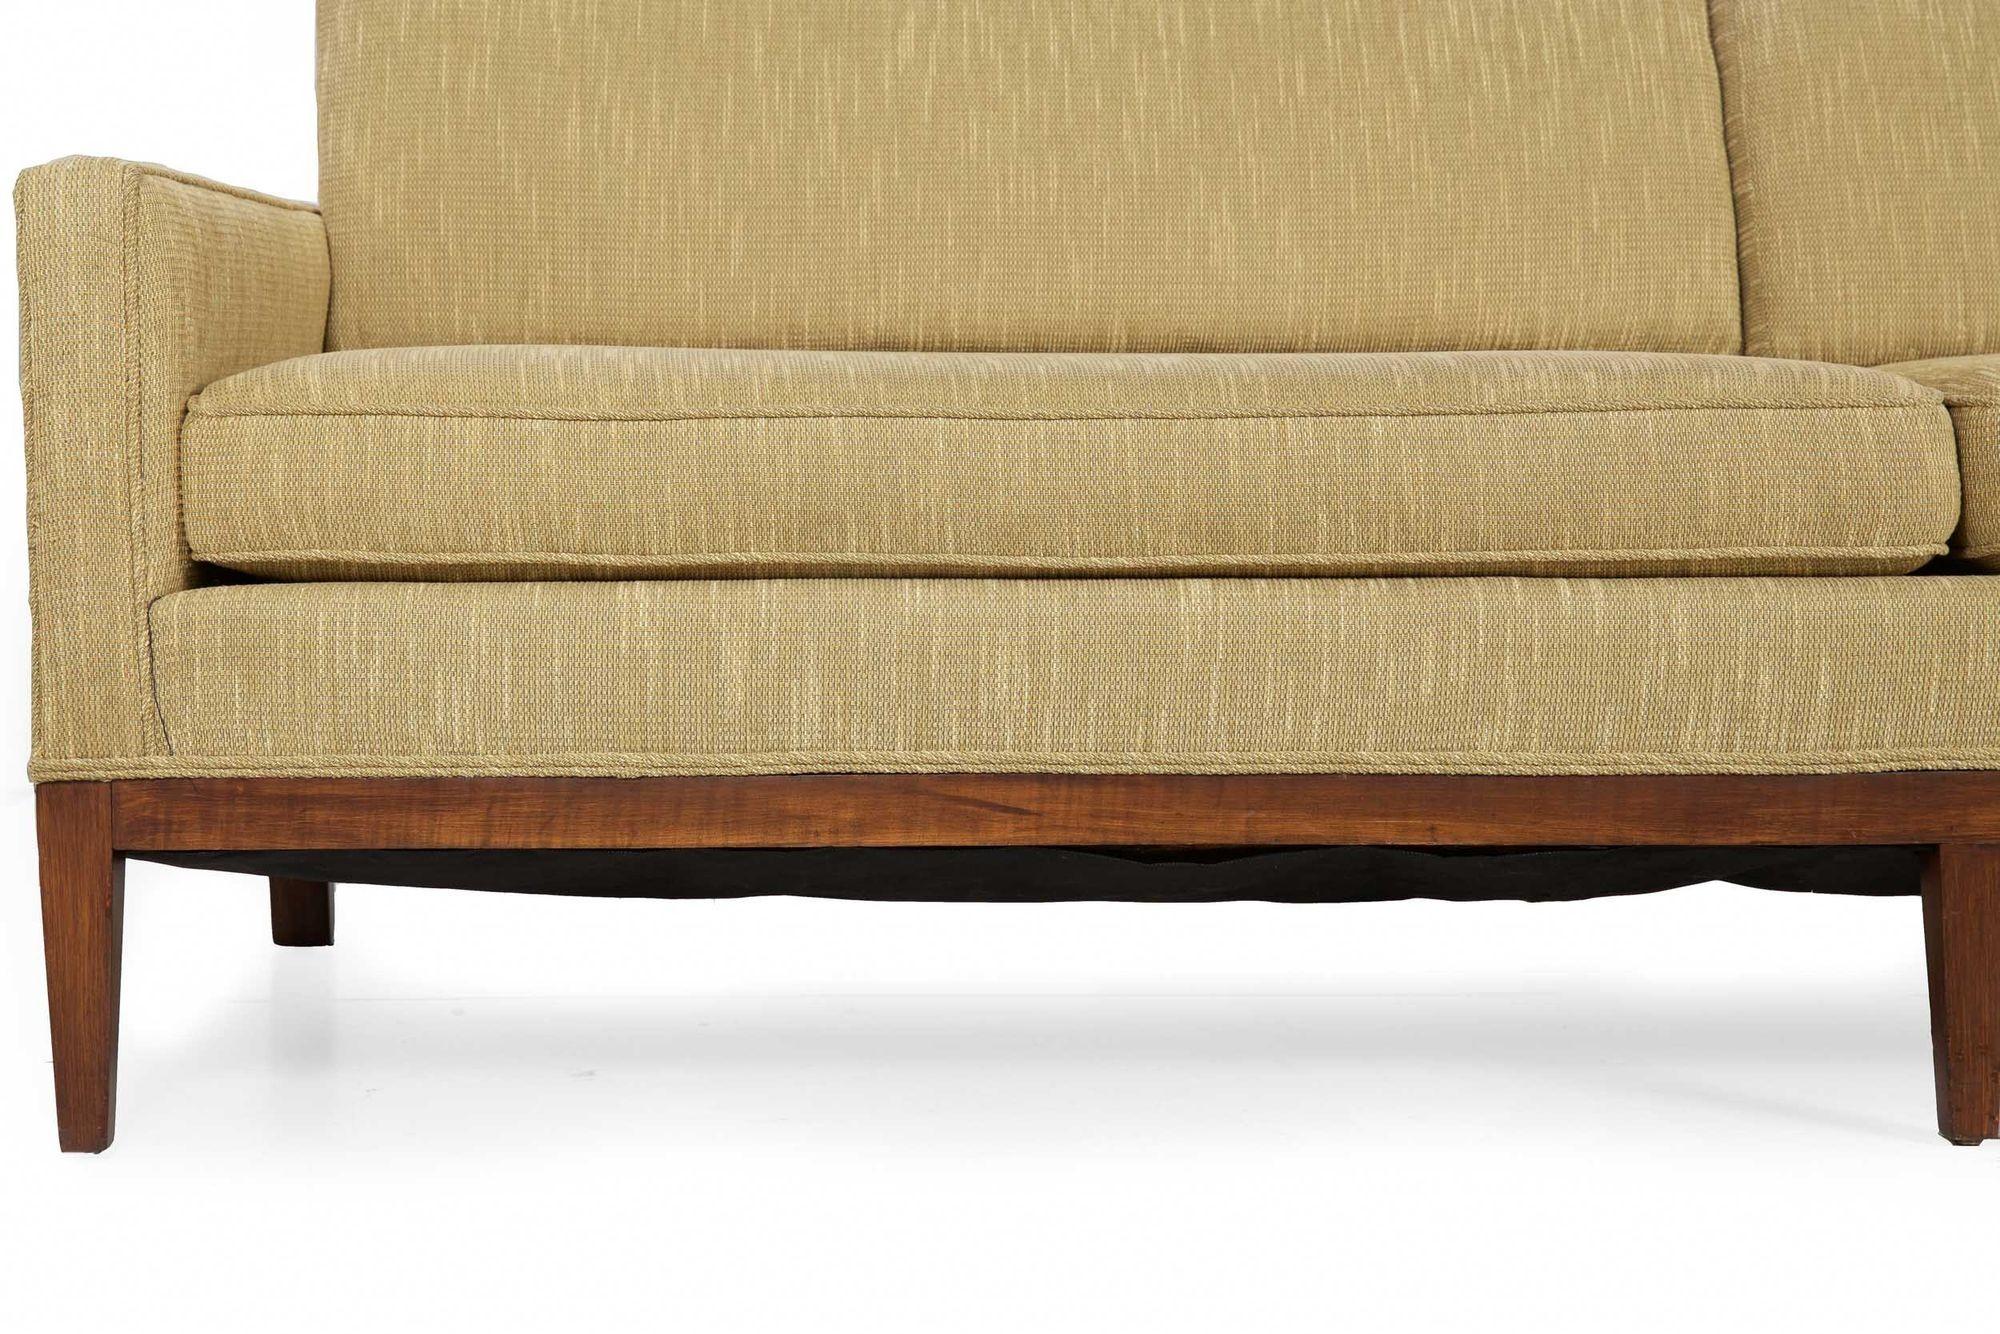 A very nice mid-century sofa from Lane's highly sought-after 